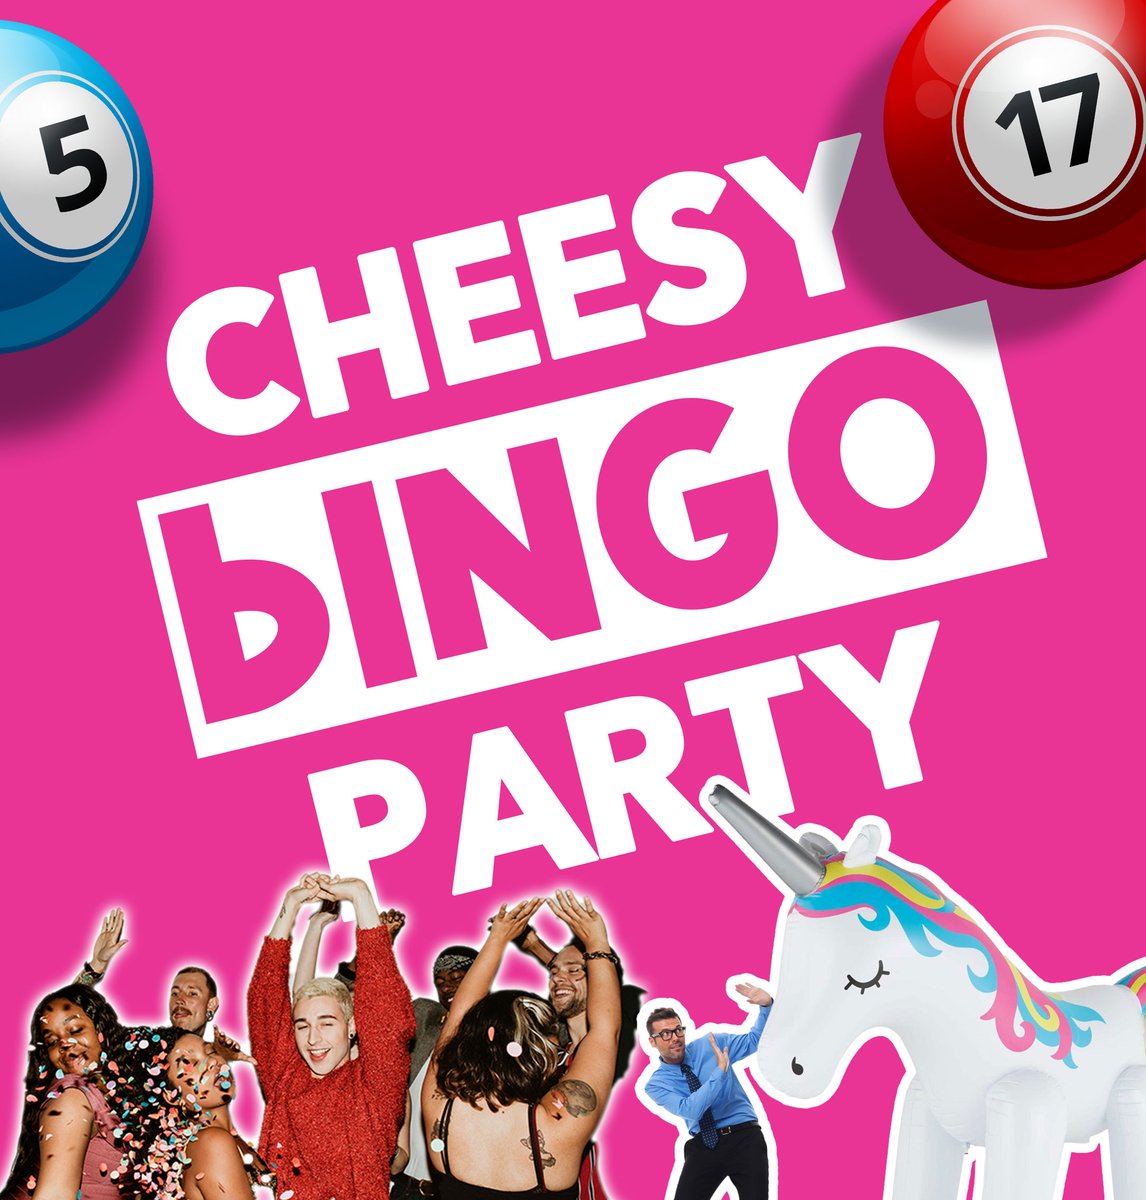 📢📢NEXT WEEKEND📢📢 Cheesy Bingo Party Saturday 11 May Book now for a great night out! exetercornexchange.co.uk/whats-on/chees… #events #exetercornexchange #exeter #whatsonexeter #dance #comedy #standup #musicvenue #livemusic #performancevenue #comedyvenue #exetertickets #panto #aneveningwith